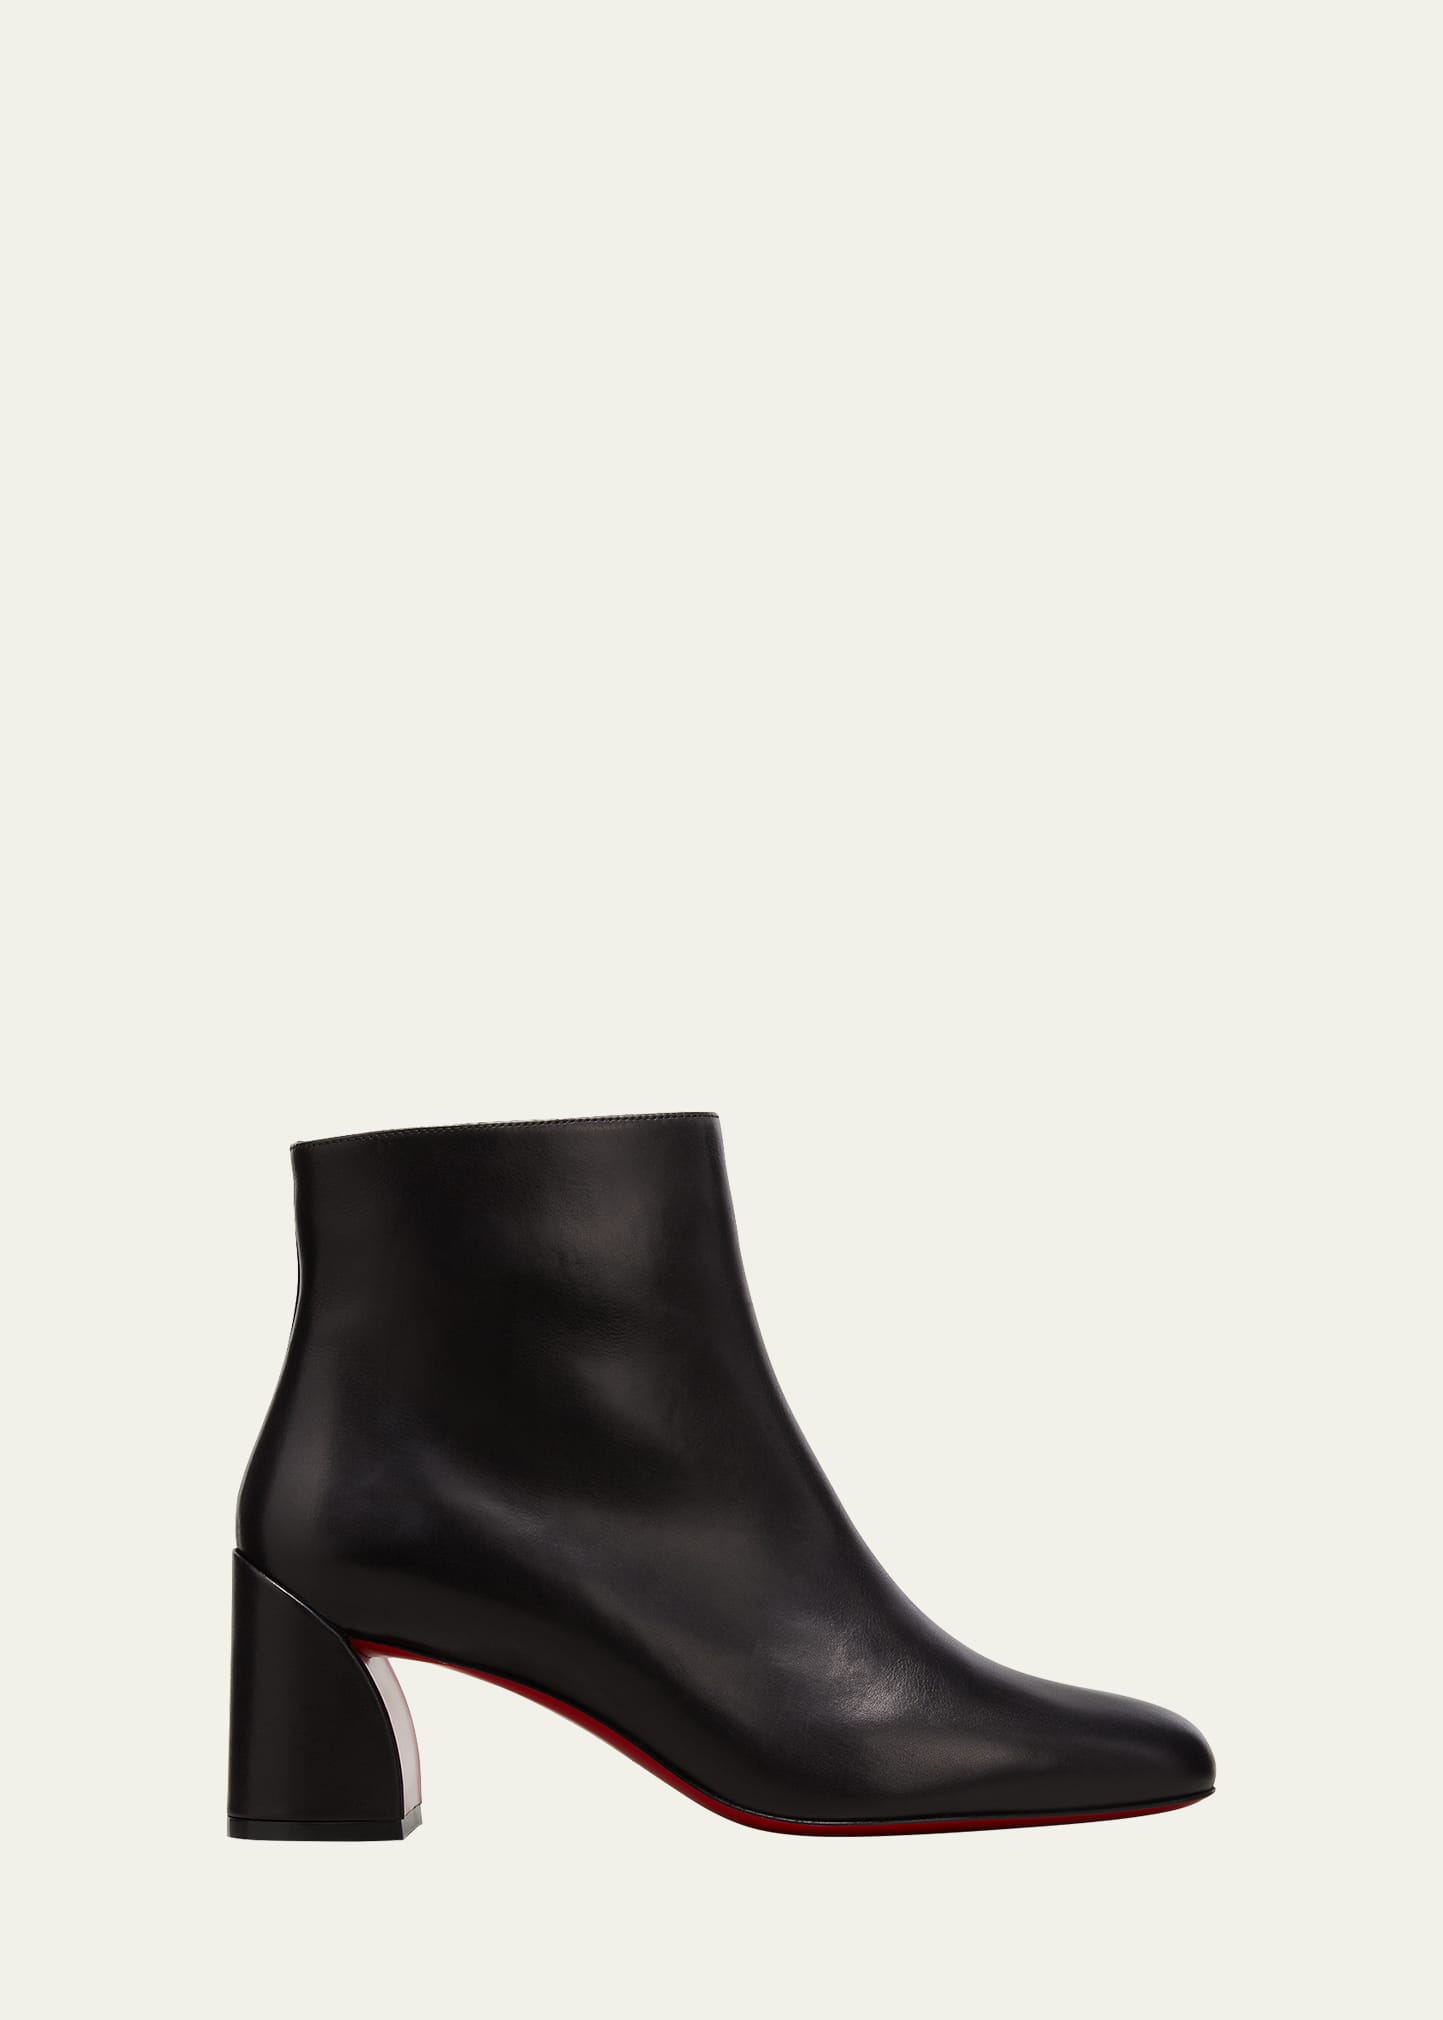 Turela Leather Side-Zip Red Sole Booties